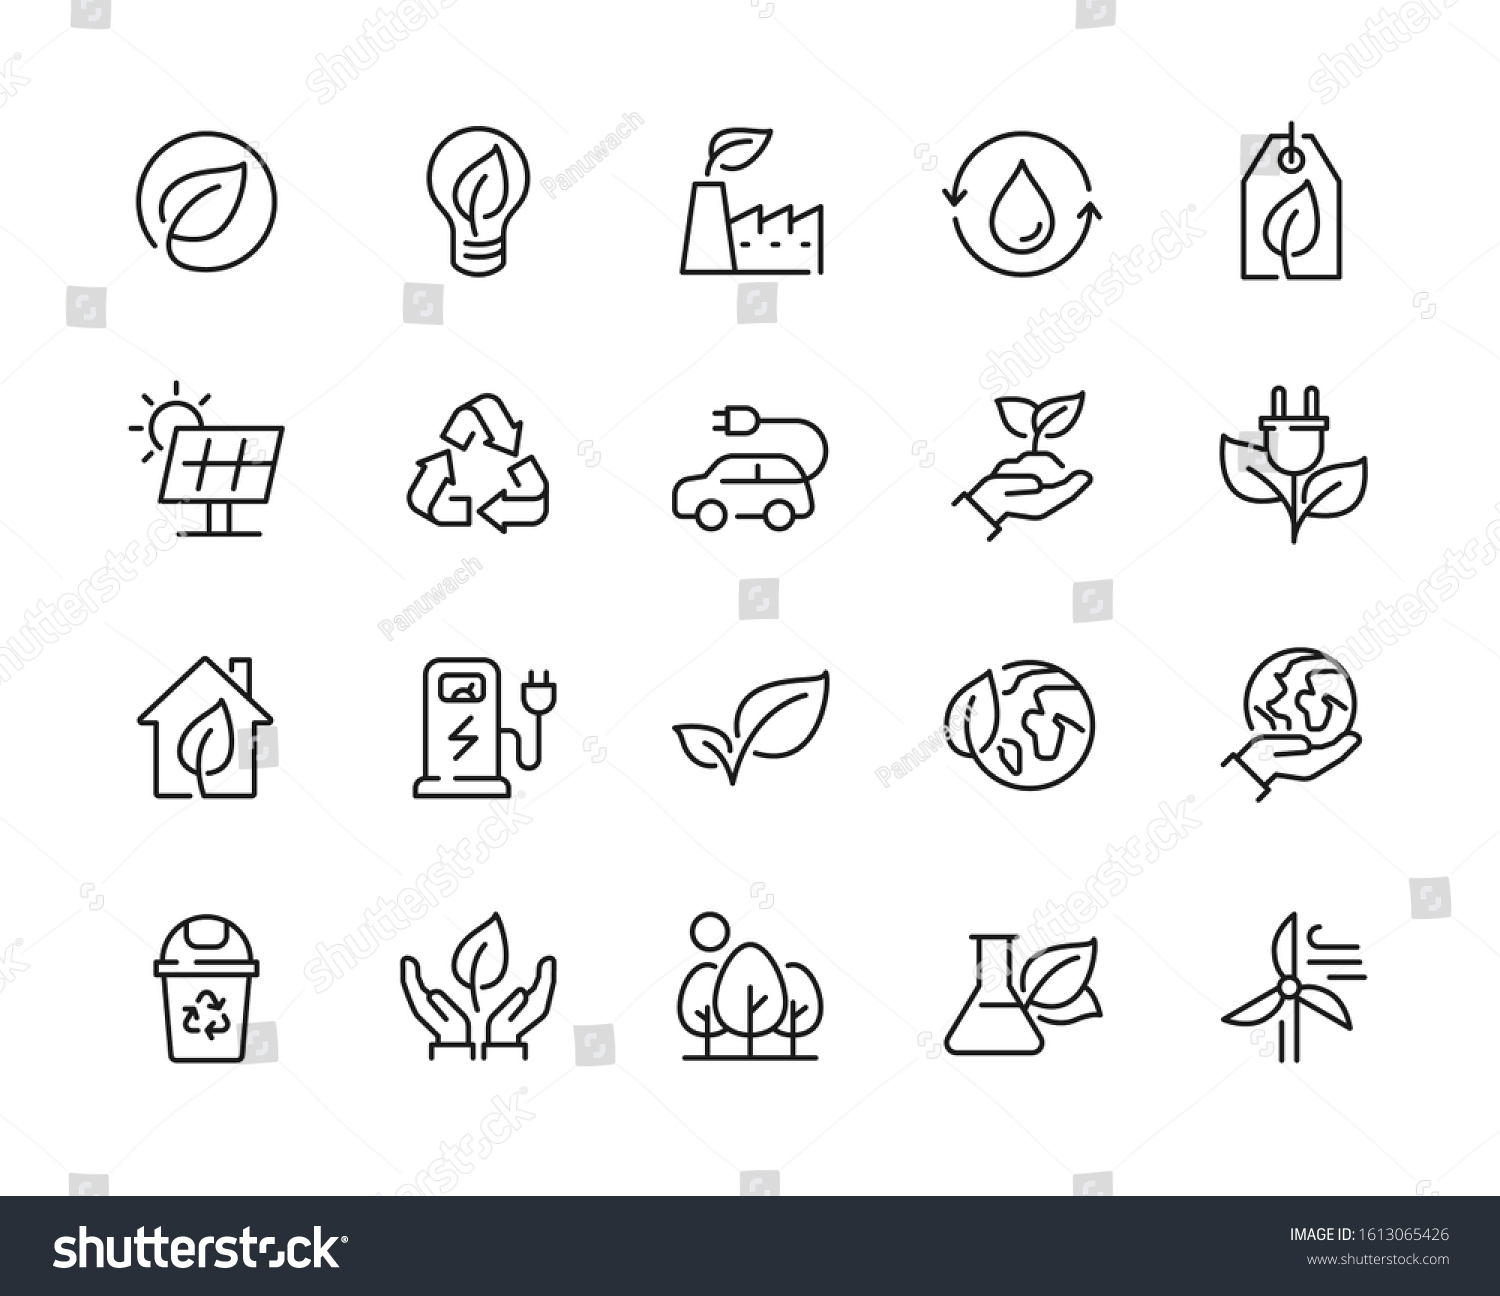 Eco friendly related thin line icon set in minimal style. Linear ecology icons. Environmental sustainability simple symbol. Editable stroke  #1613065426